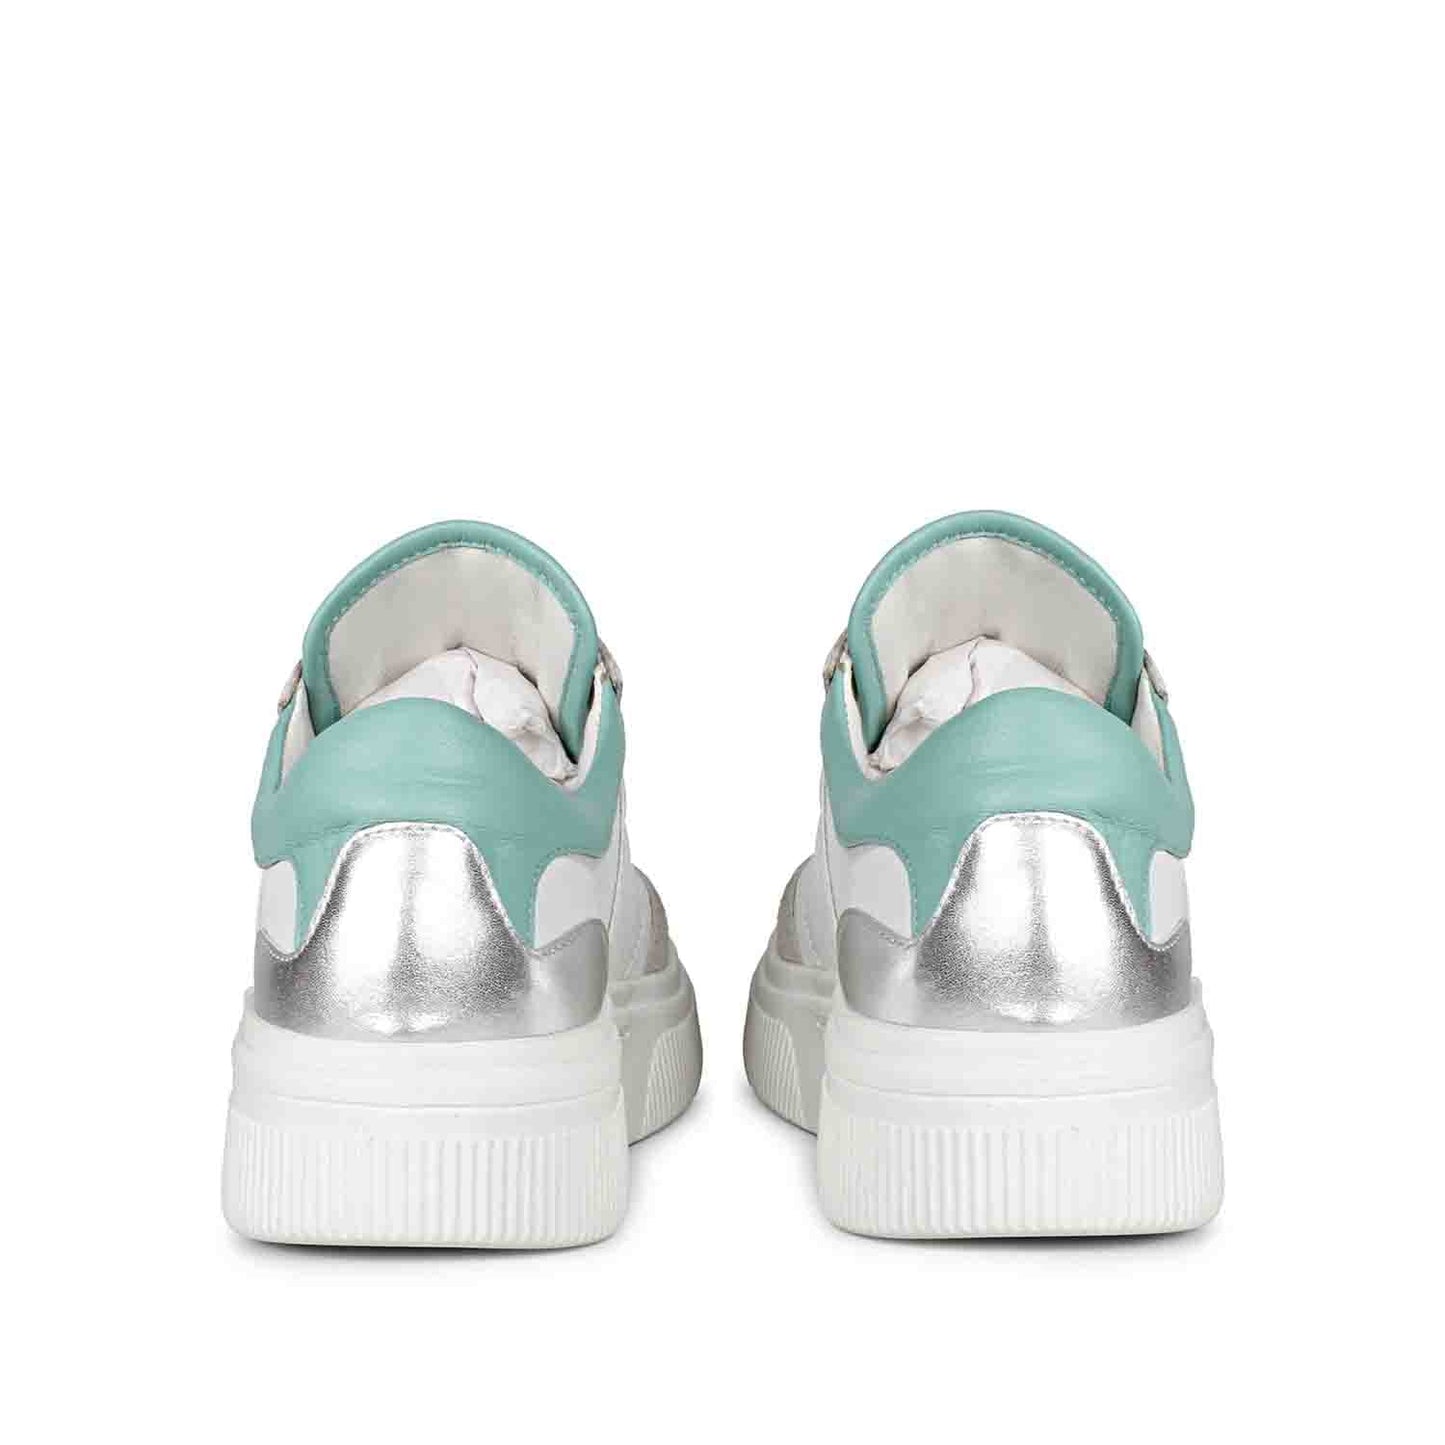 Whitesta Aloisia Mint Sneakers - Fashion-forward leather footwear for a fresh and modern vibe.